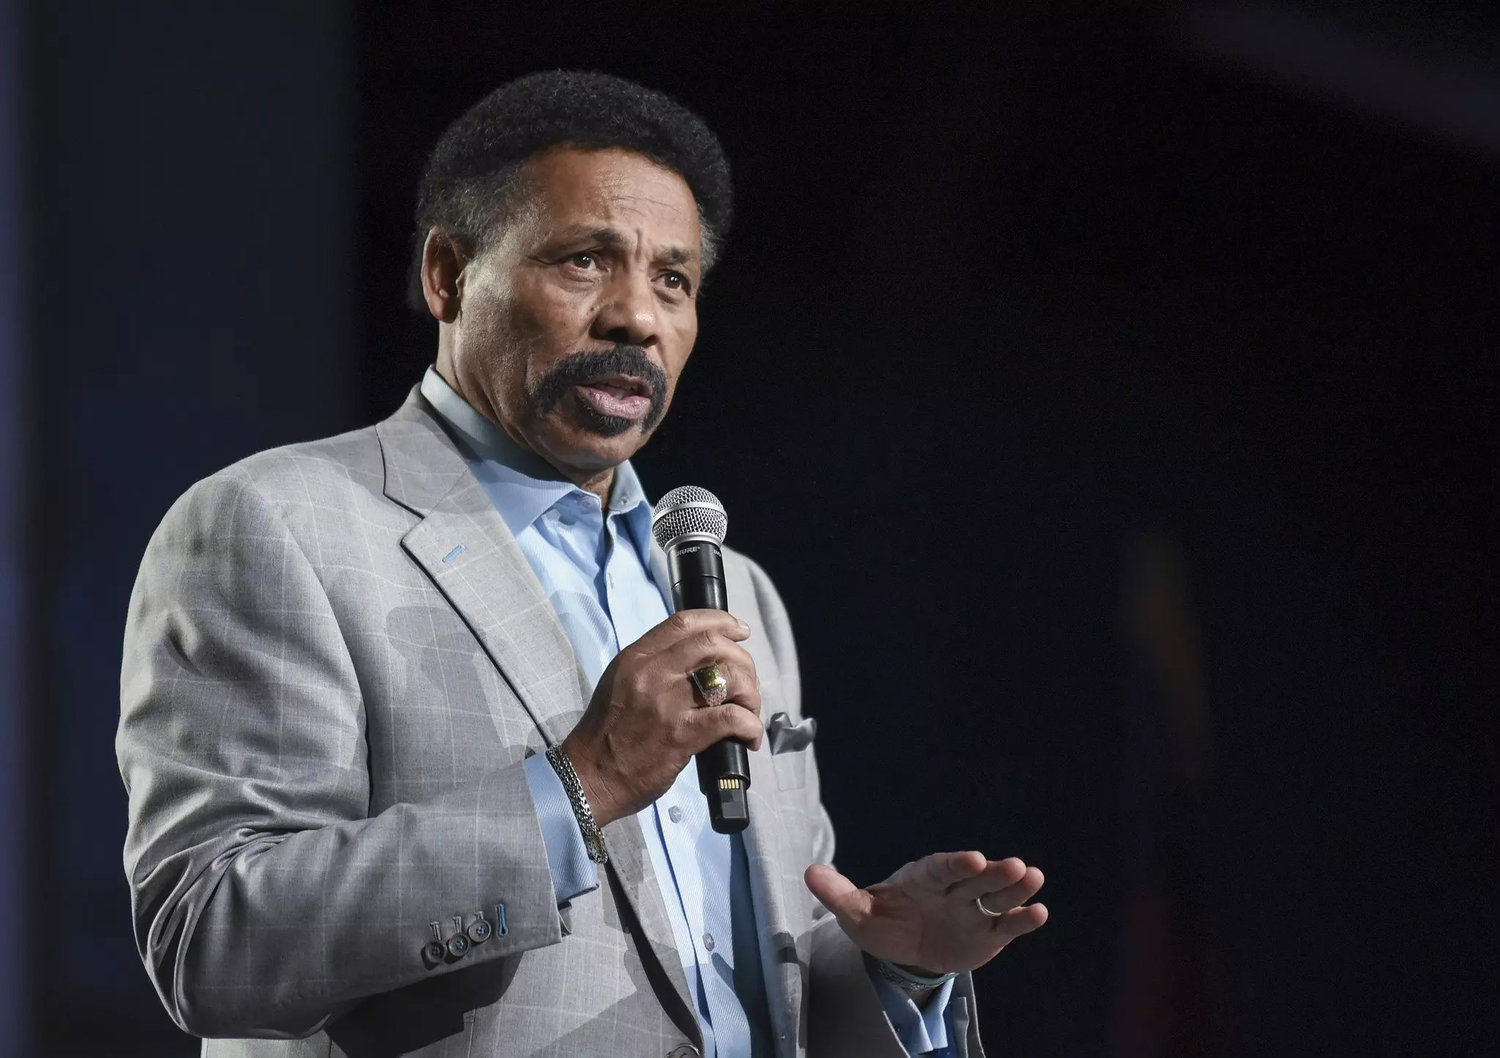 Pastor and author Tony Evans joined SBC President Ed Litton and former SBC President Fred Luter to announce an initiative June 15 to build racial unity nationwide, conducted by the local church, called The Unify Project. The Unify Project will work in concert with The Urban Initiative, a ministry Evans co-founded in 1981 with his late wife Lois. (Baptist Press/Karen McCutcheon)